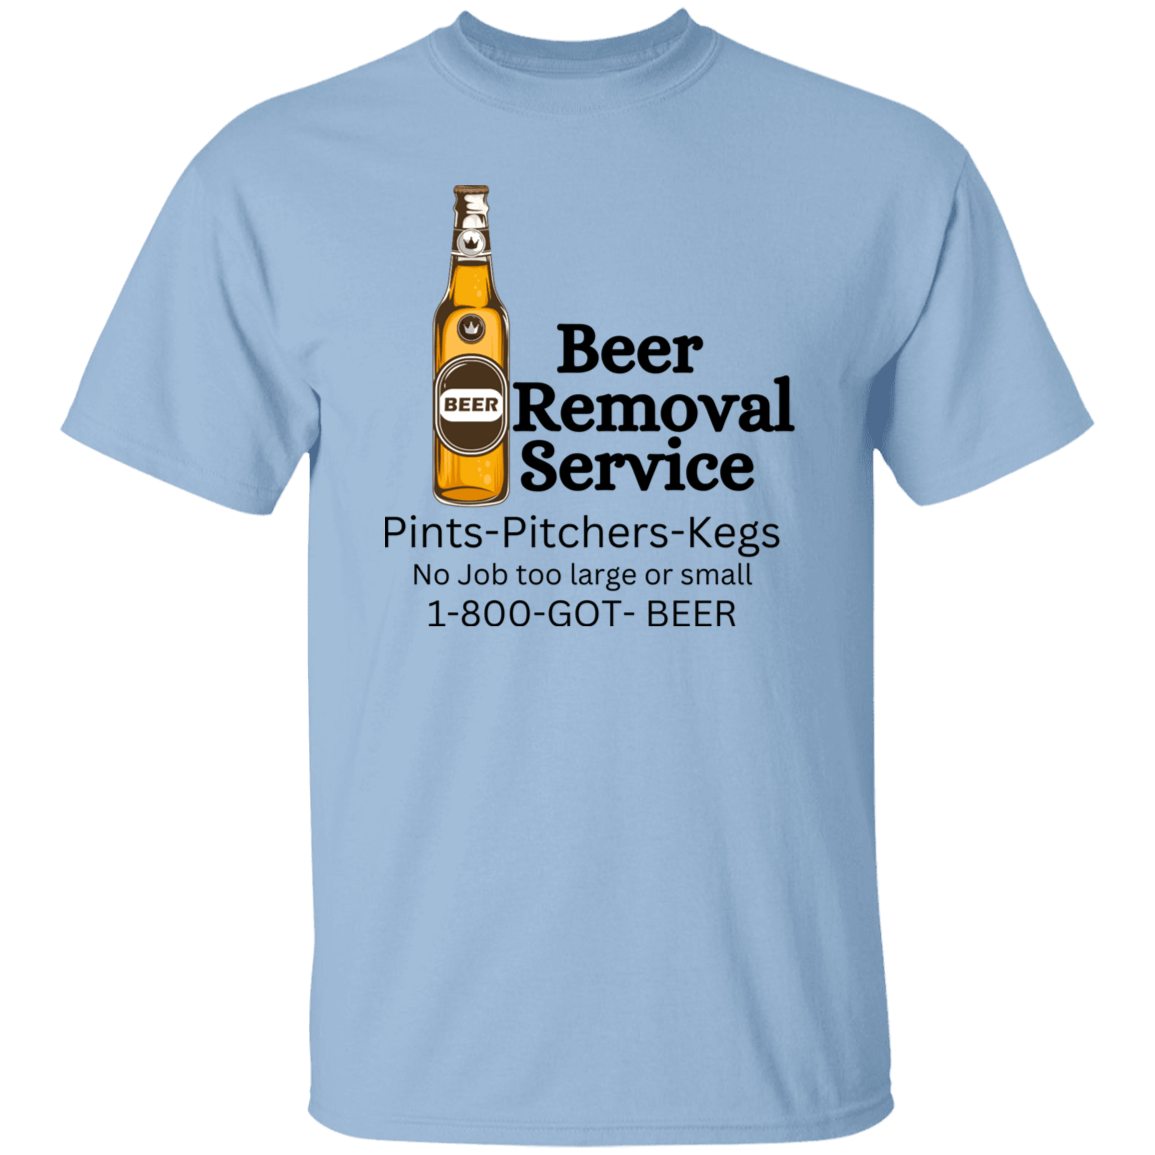 Beer Removal Service T-Shirt